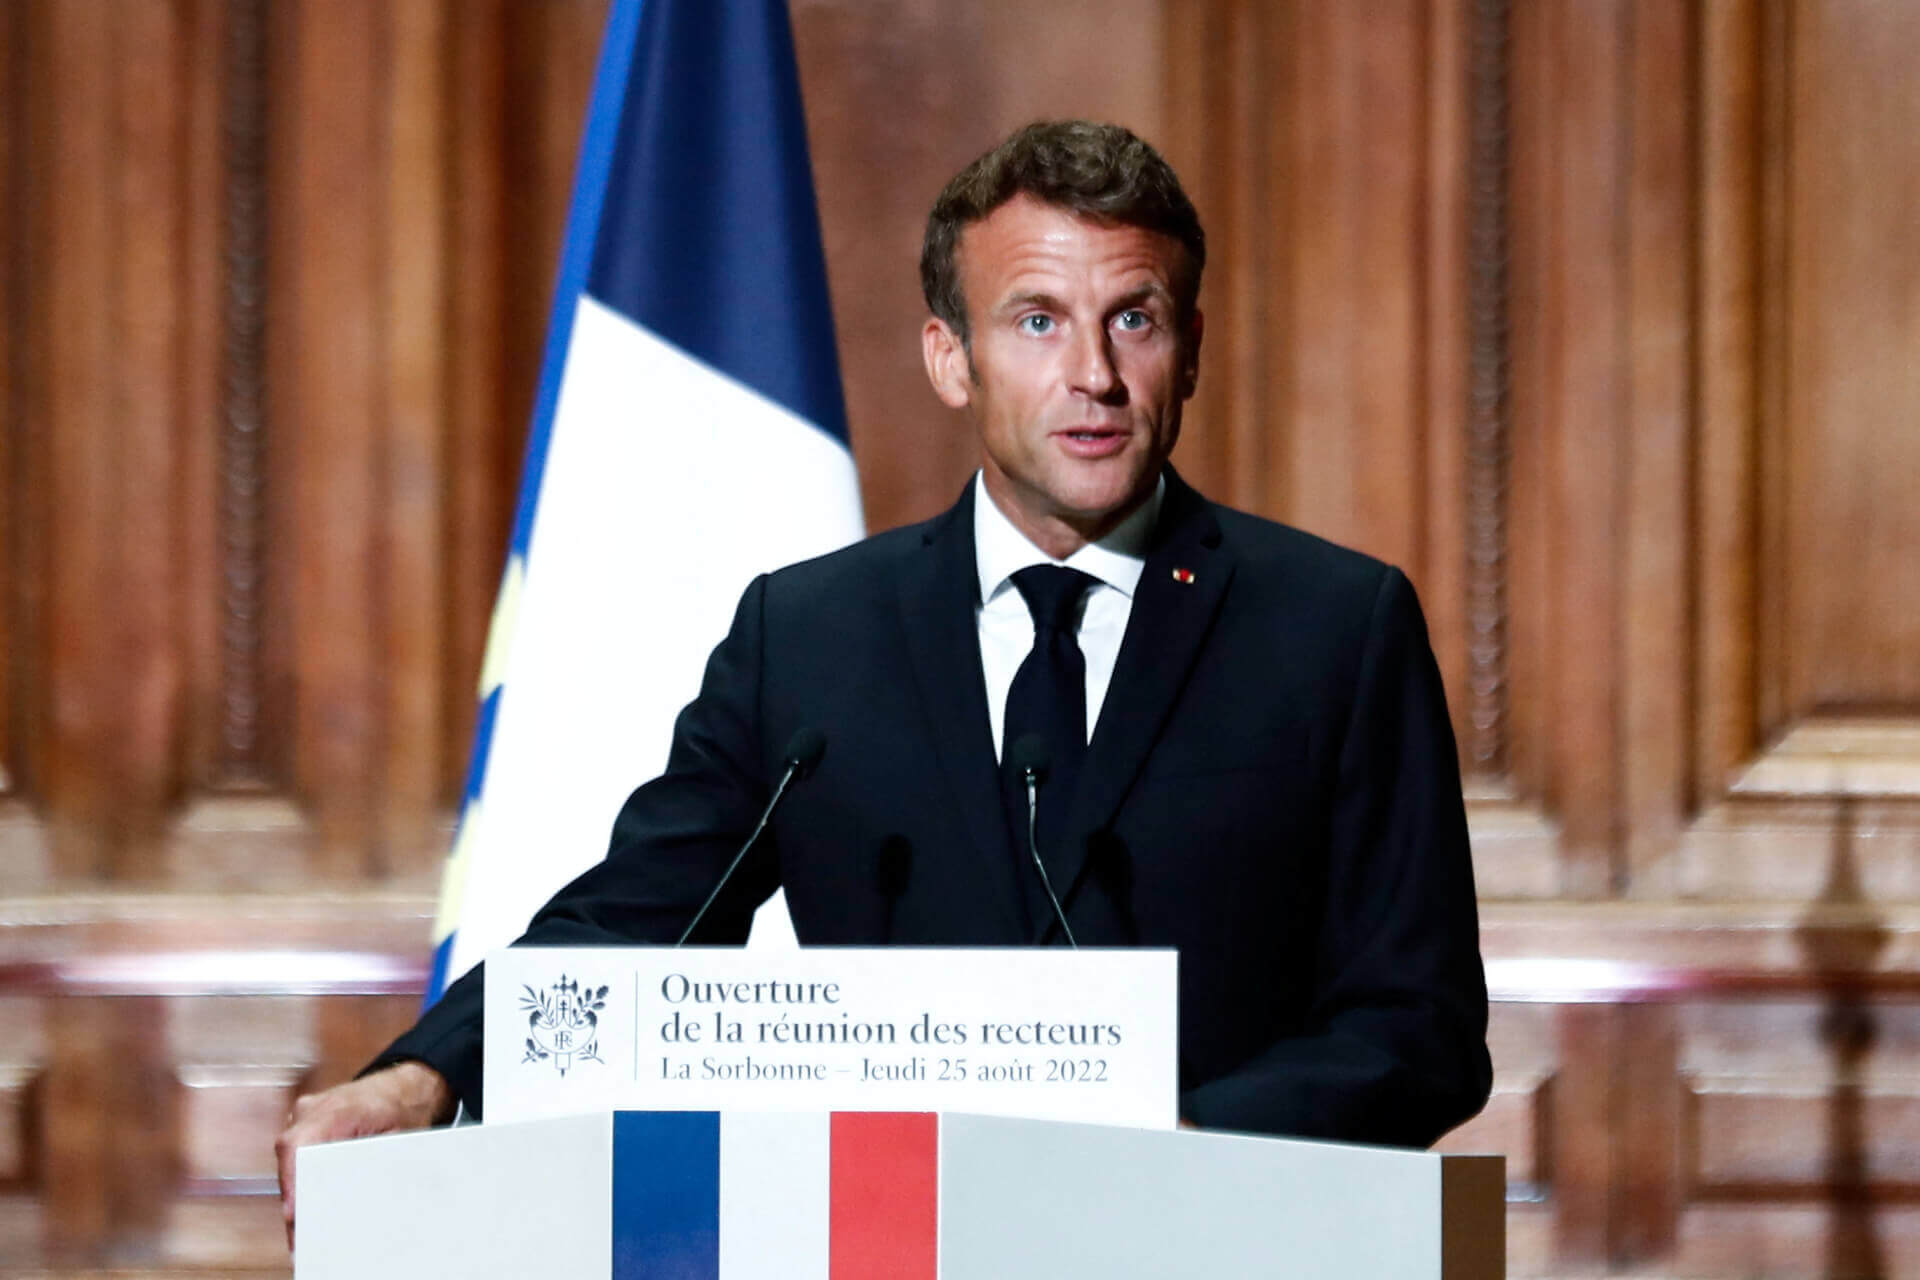 France Says Nuclear Status Gives it “Special Responsibility” in Europe